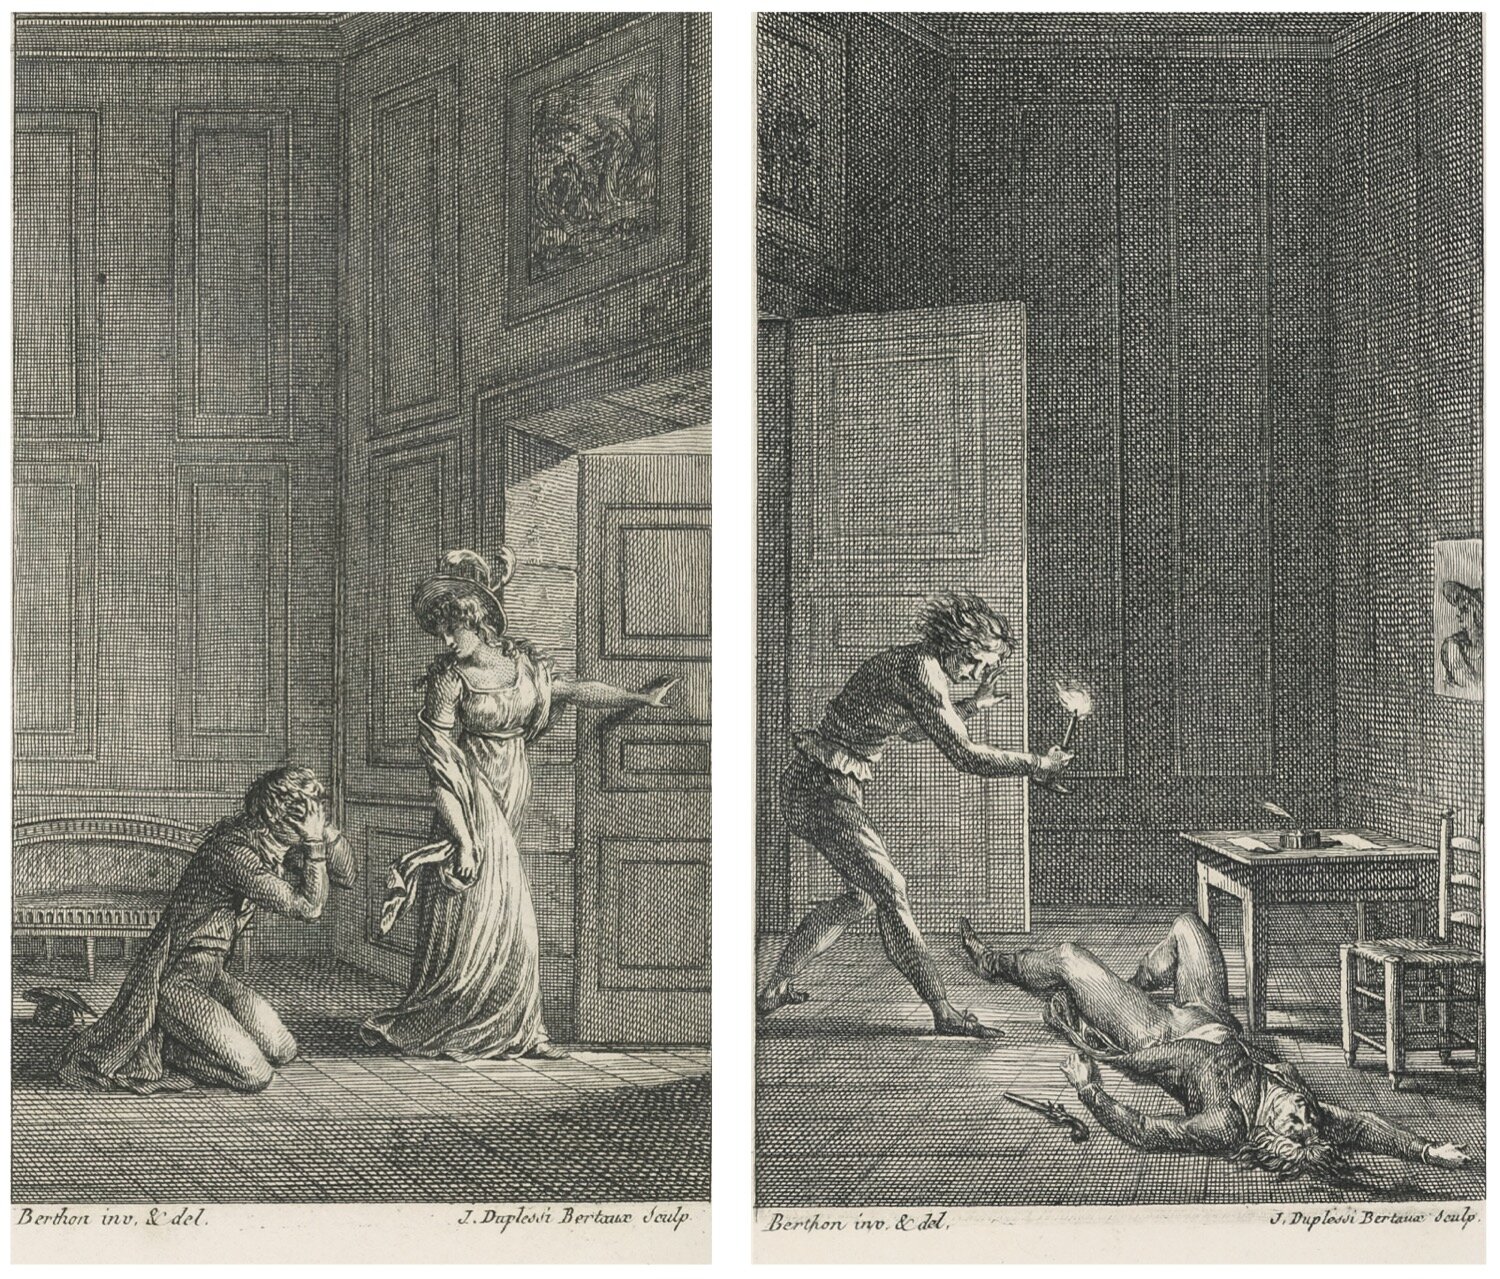  An example of the 1825 edition, which included four etchings after René Théodore Berthon [no. 261] 